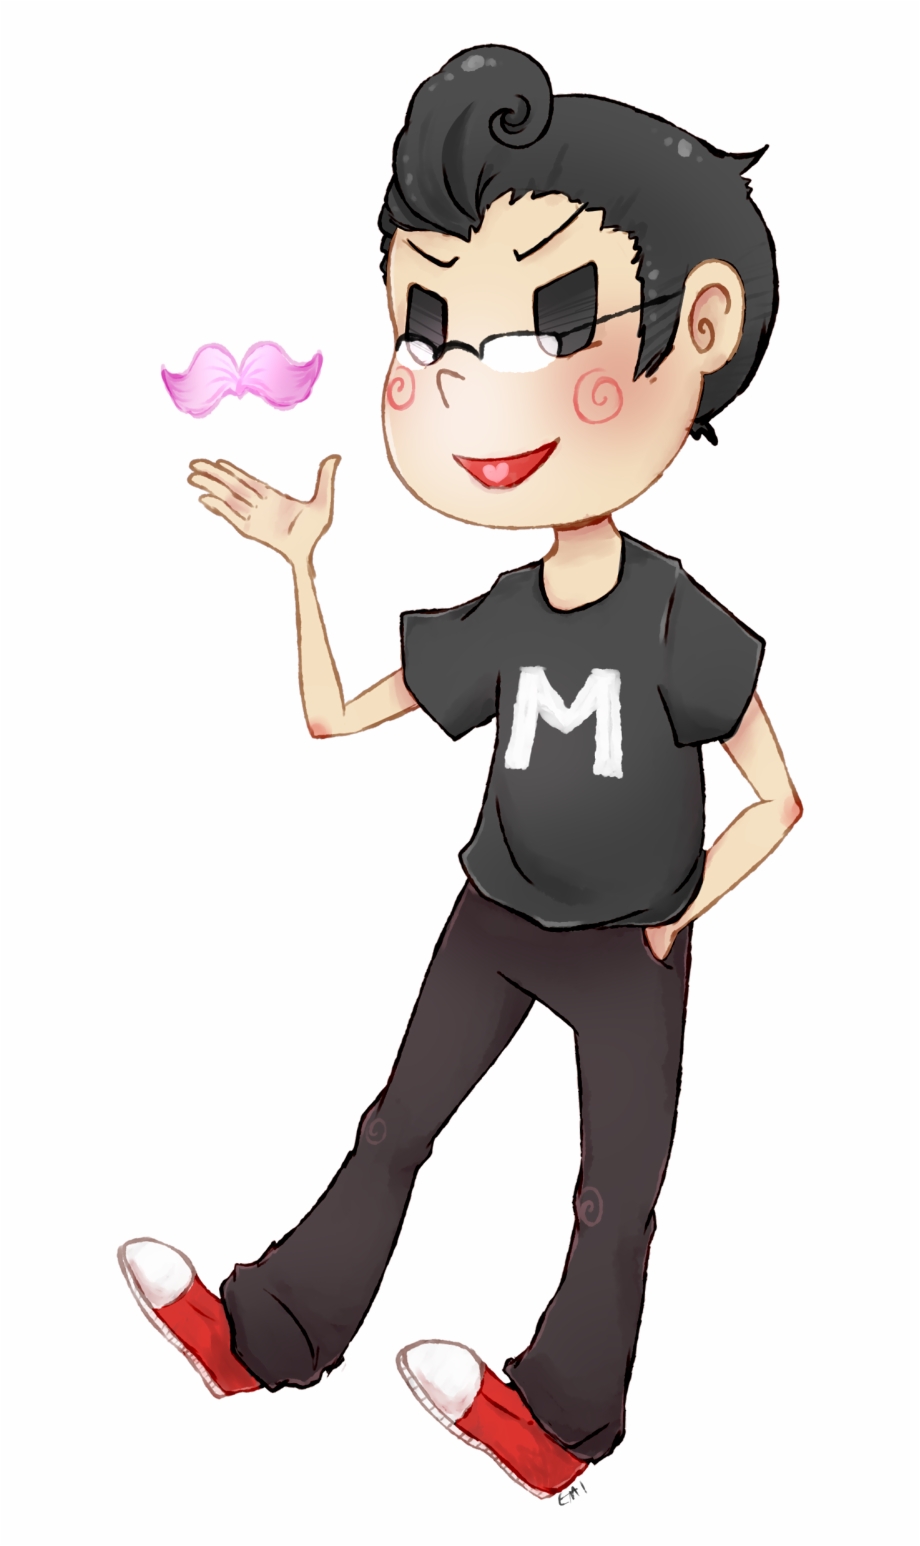  A Tiny Transparent Markiplier For All Your